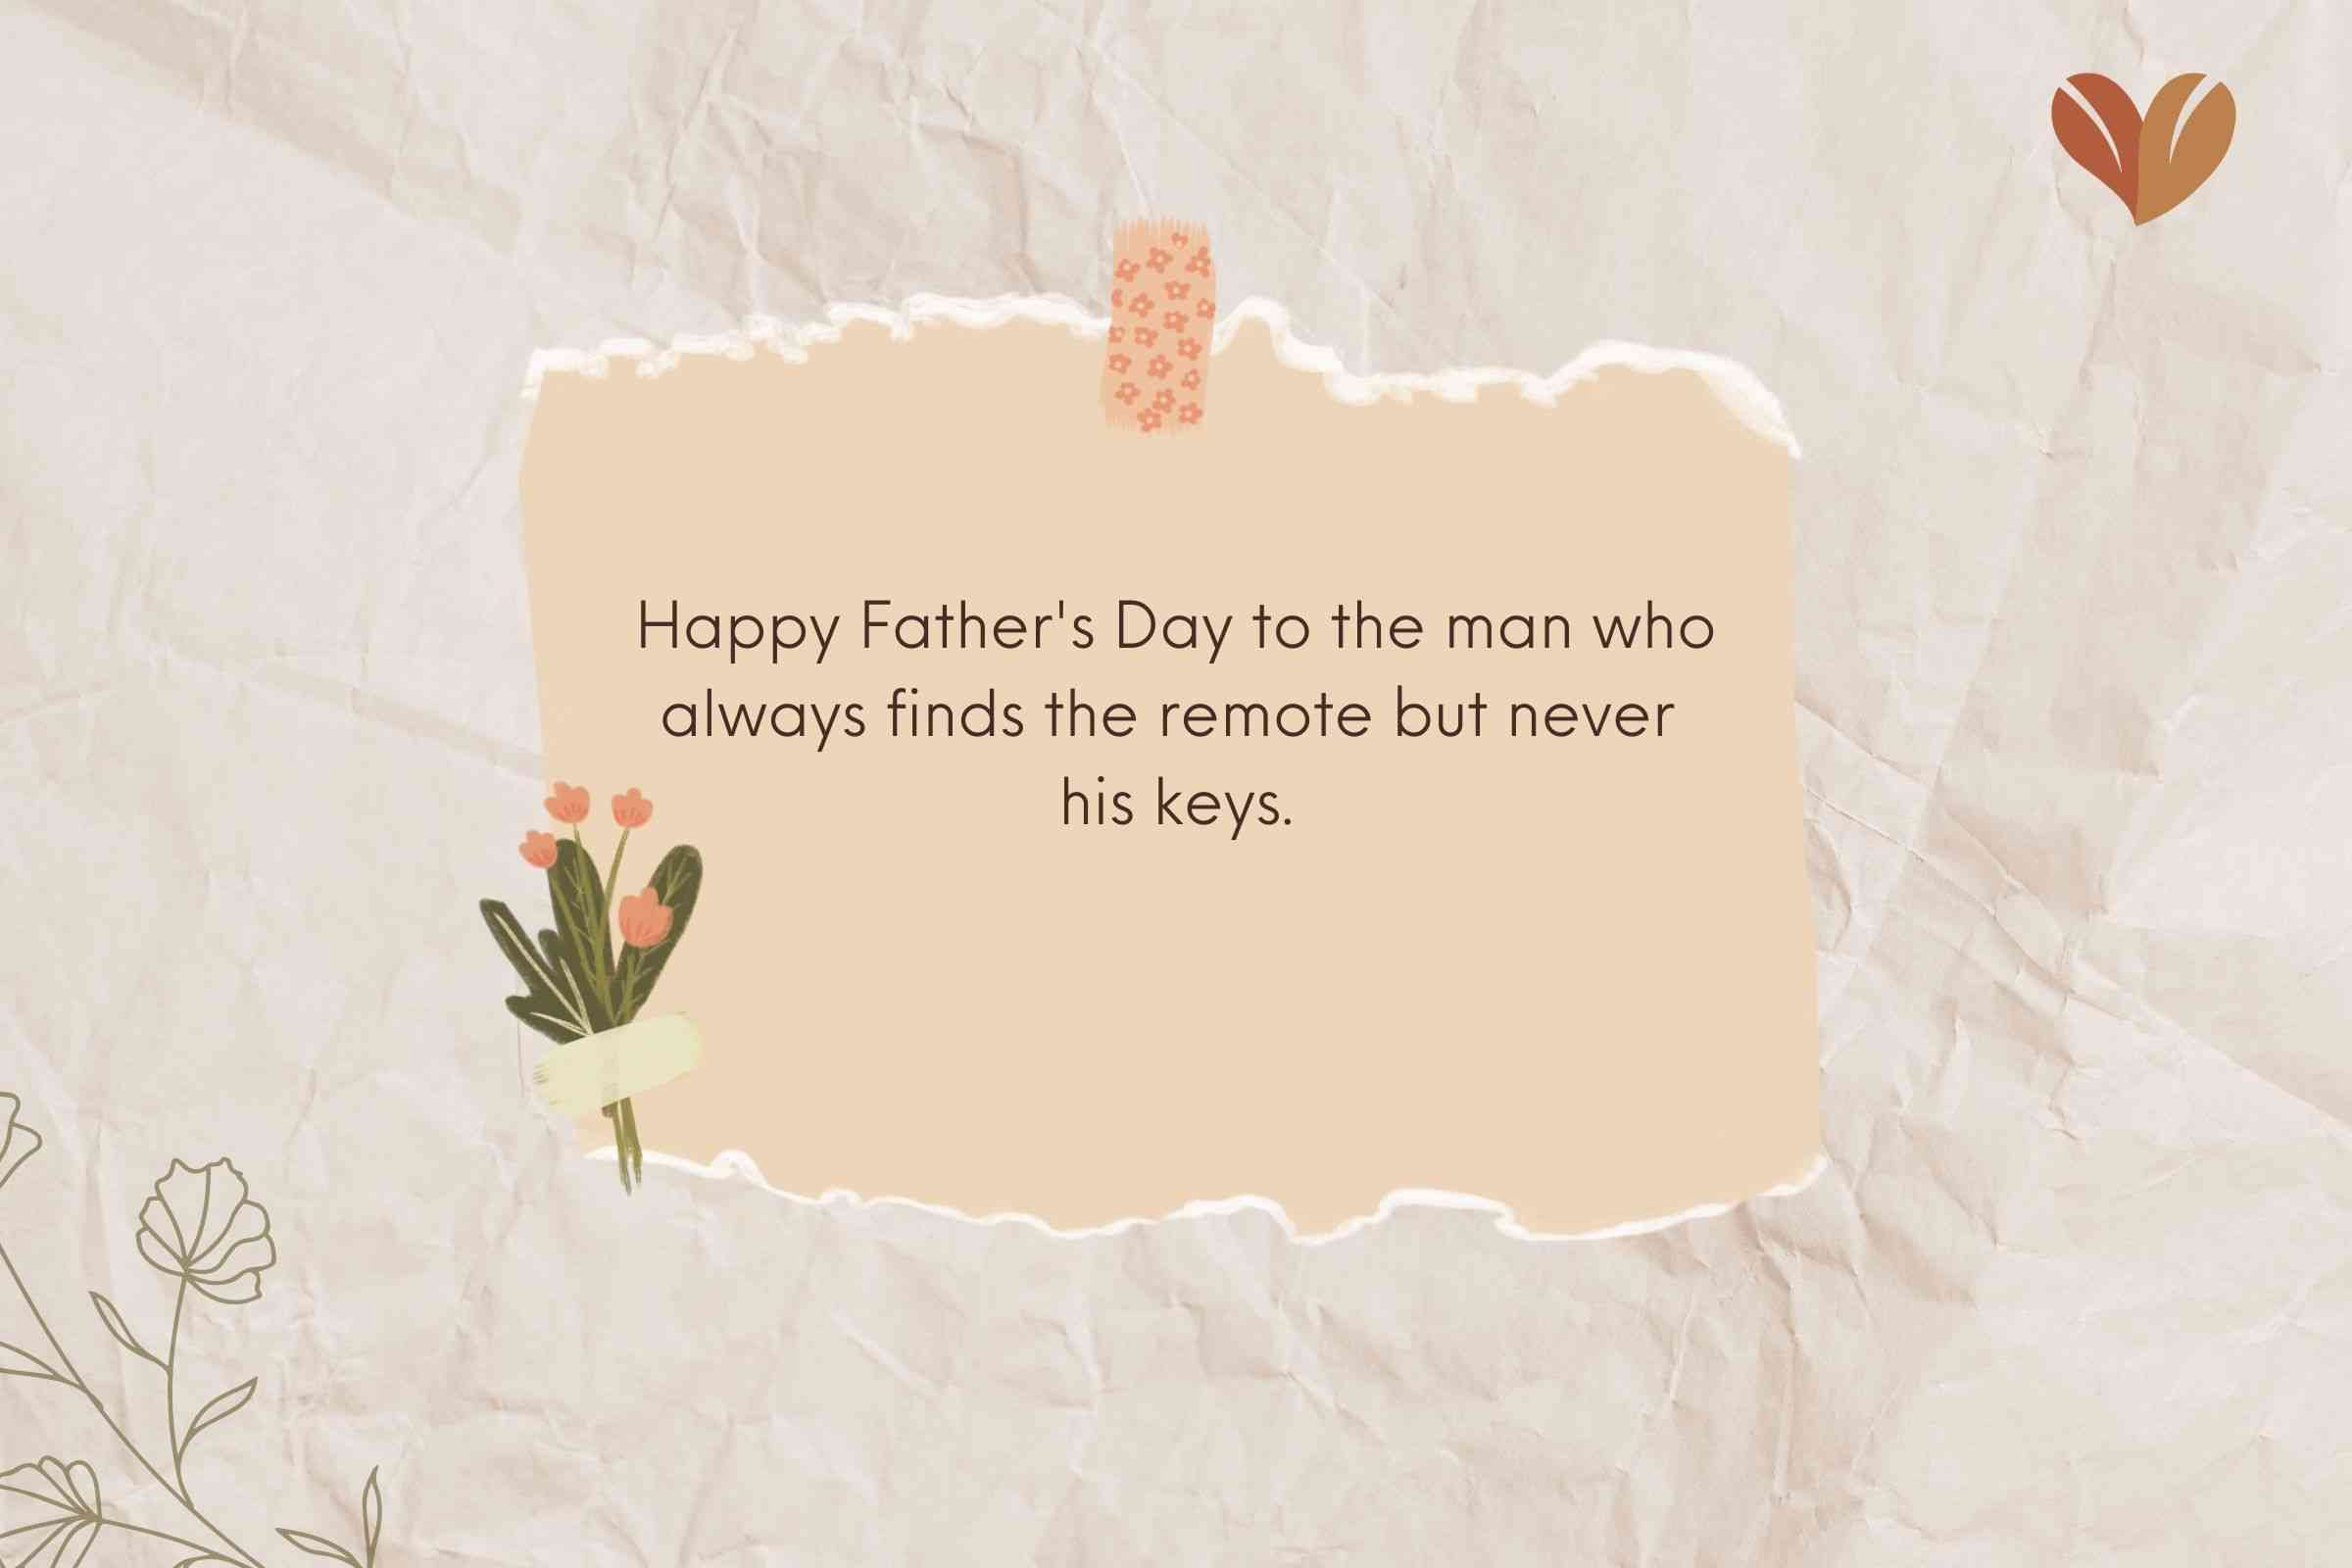 Hilarious & Heartwarming: Funny Happy Father's Day Quotes to Share